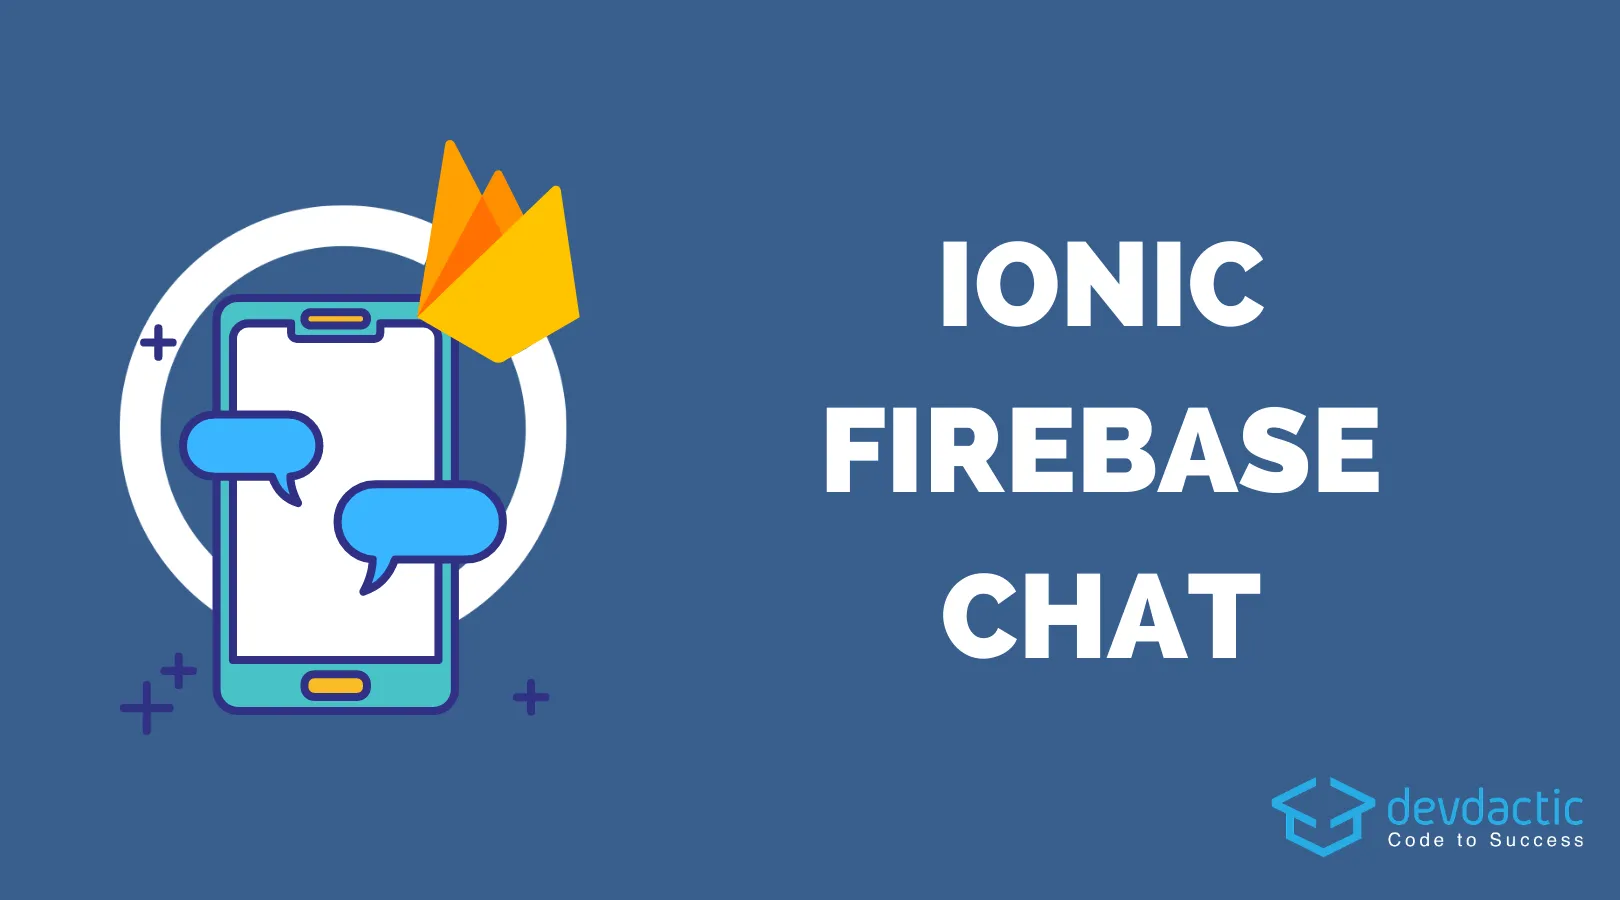 Building an Ionic Firebase Chat with Authentication